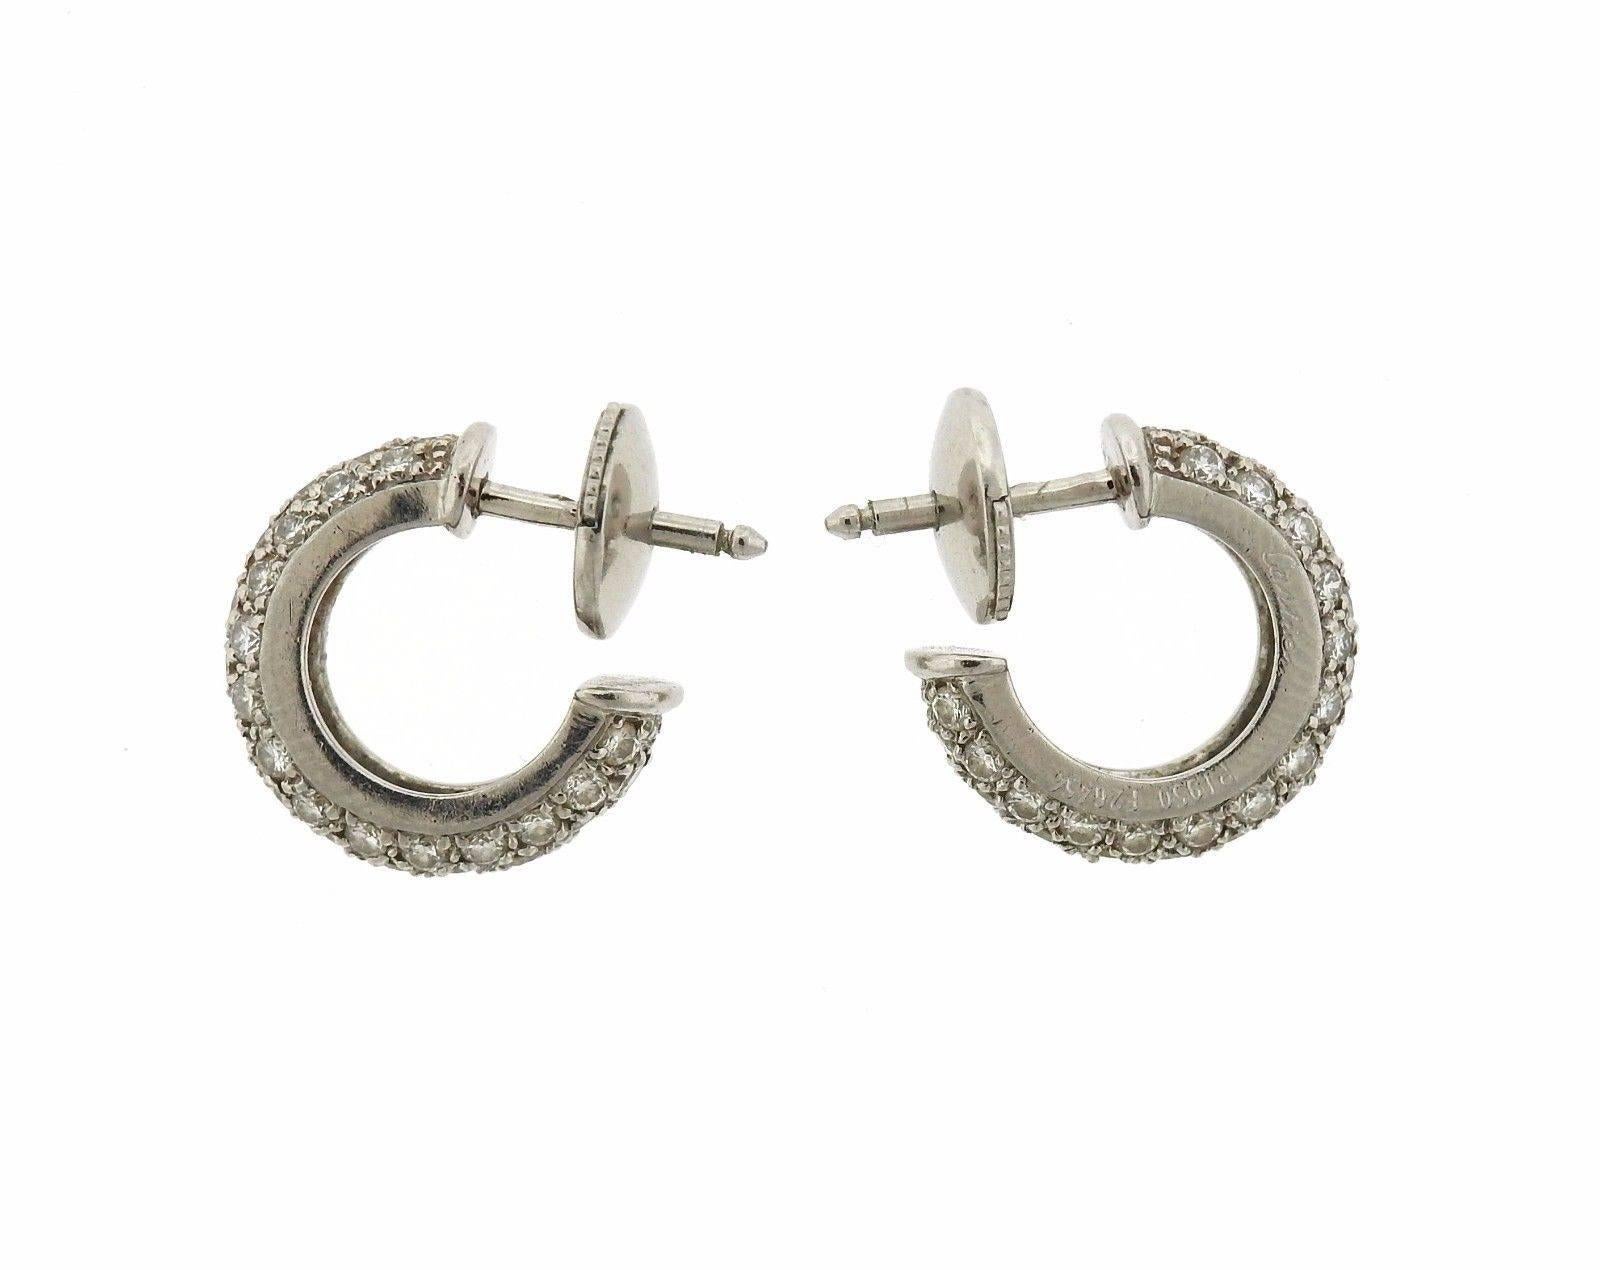 A pair of platinum hoop earrings set with approximately 1.26ctw of G/VS diamonds.  The earrings are 13mm in diameter and 3.8mm wide.  The weight of the earrings is 5.5 grams.  Marked: Cartier, pt950, 26454.
 Retail price $9600.